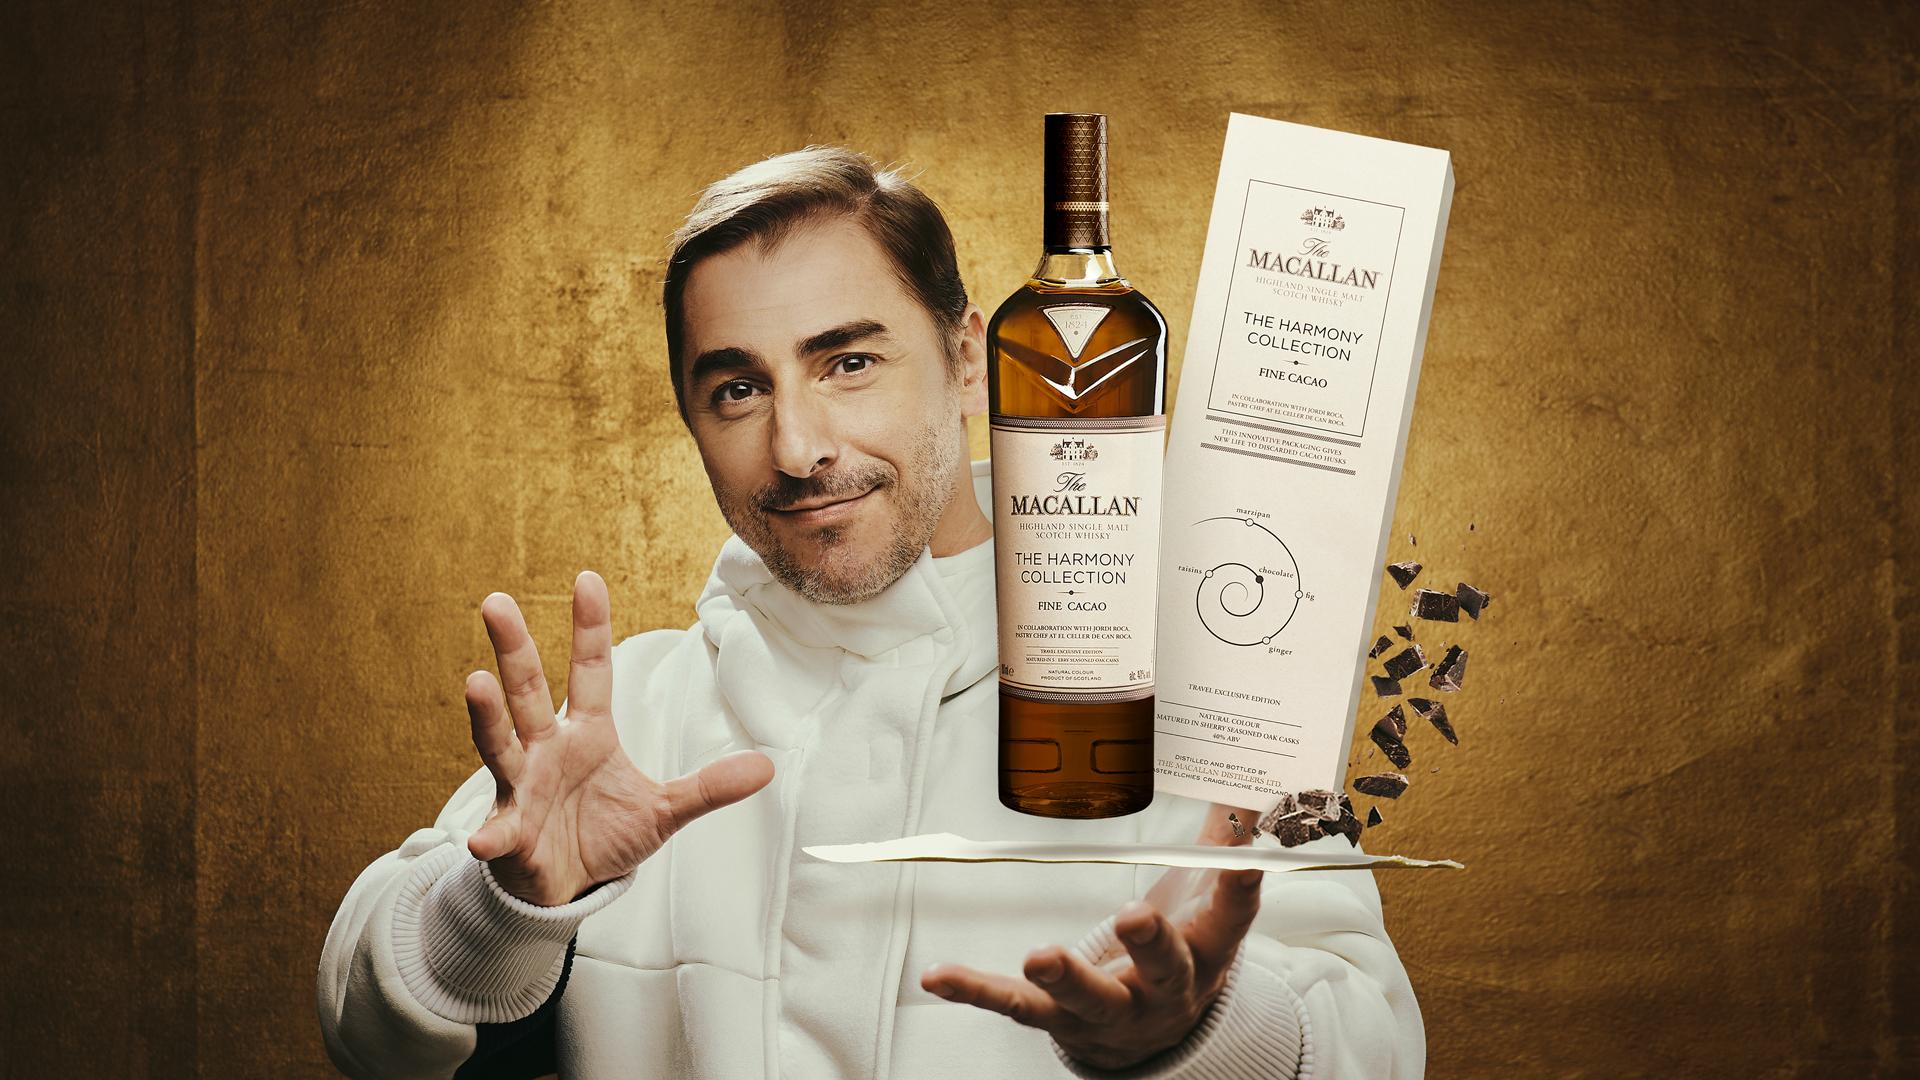 The Macallan Harmony Collection Fine Cacao